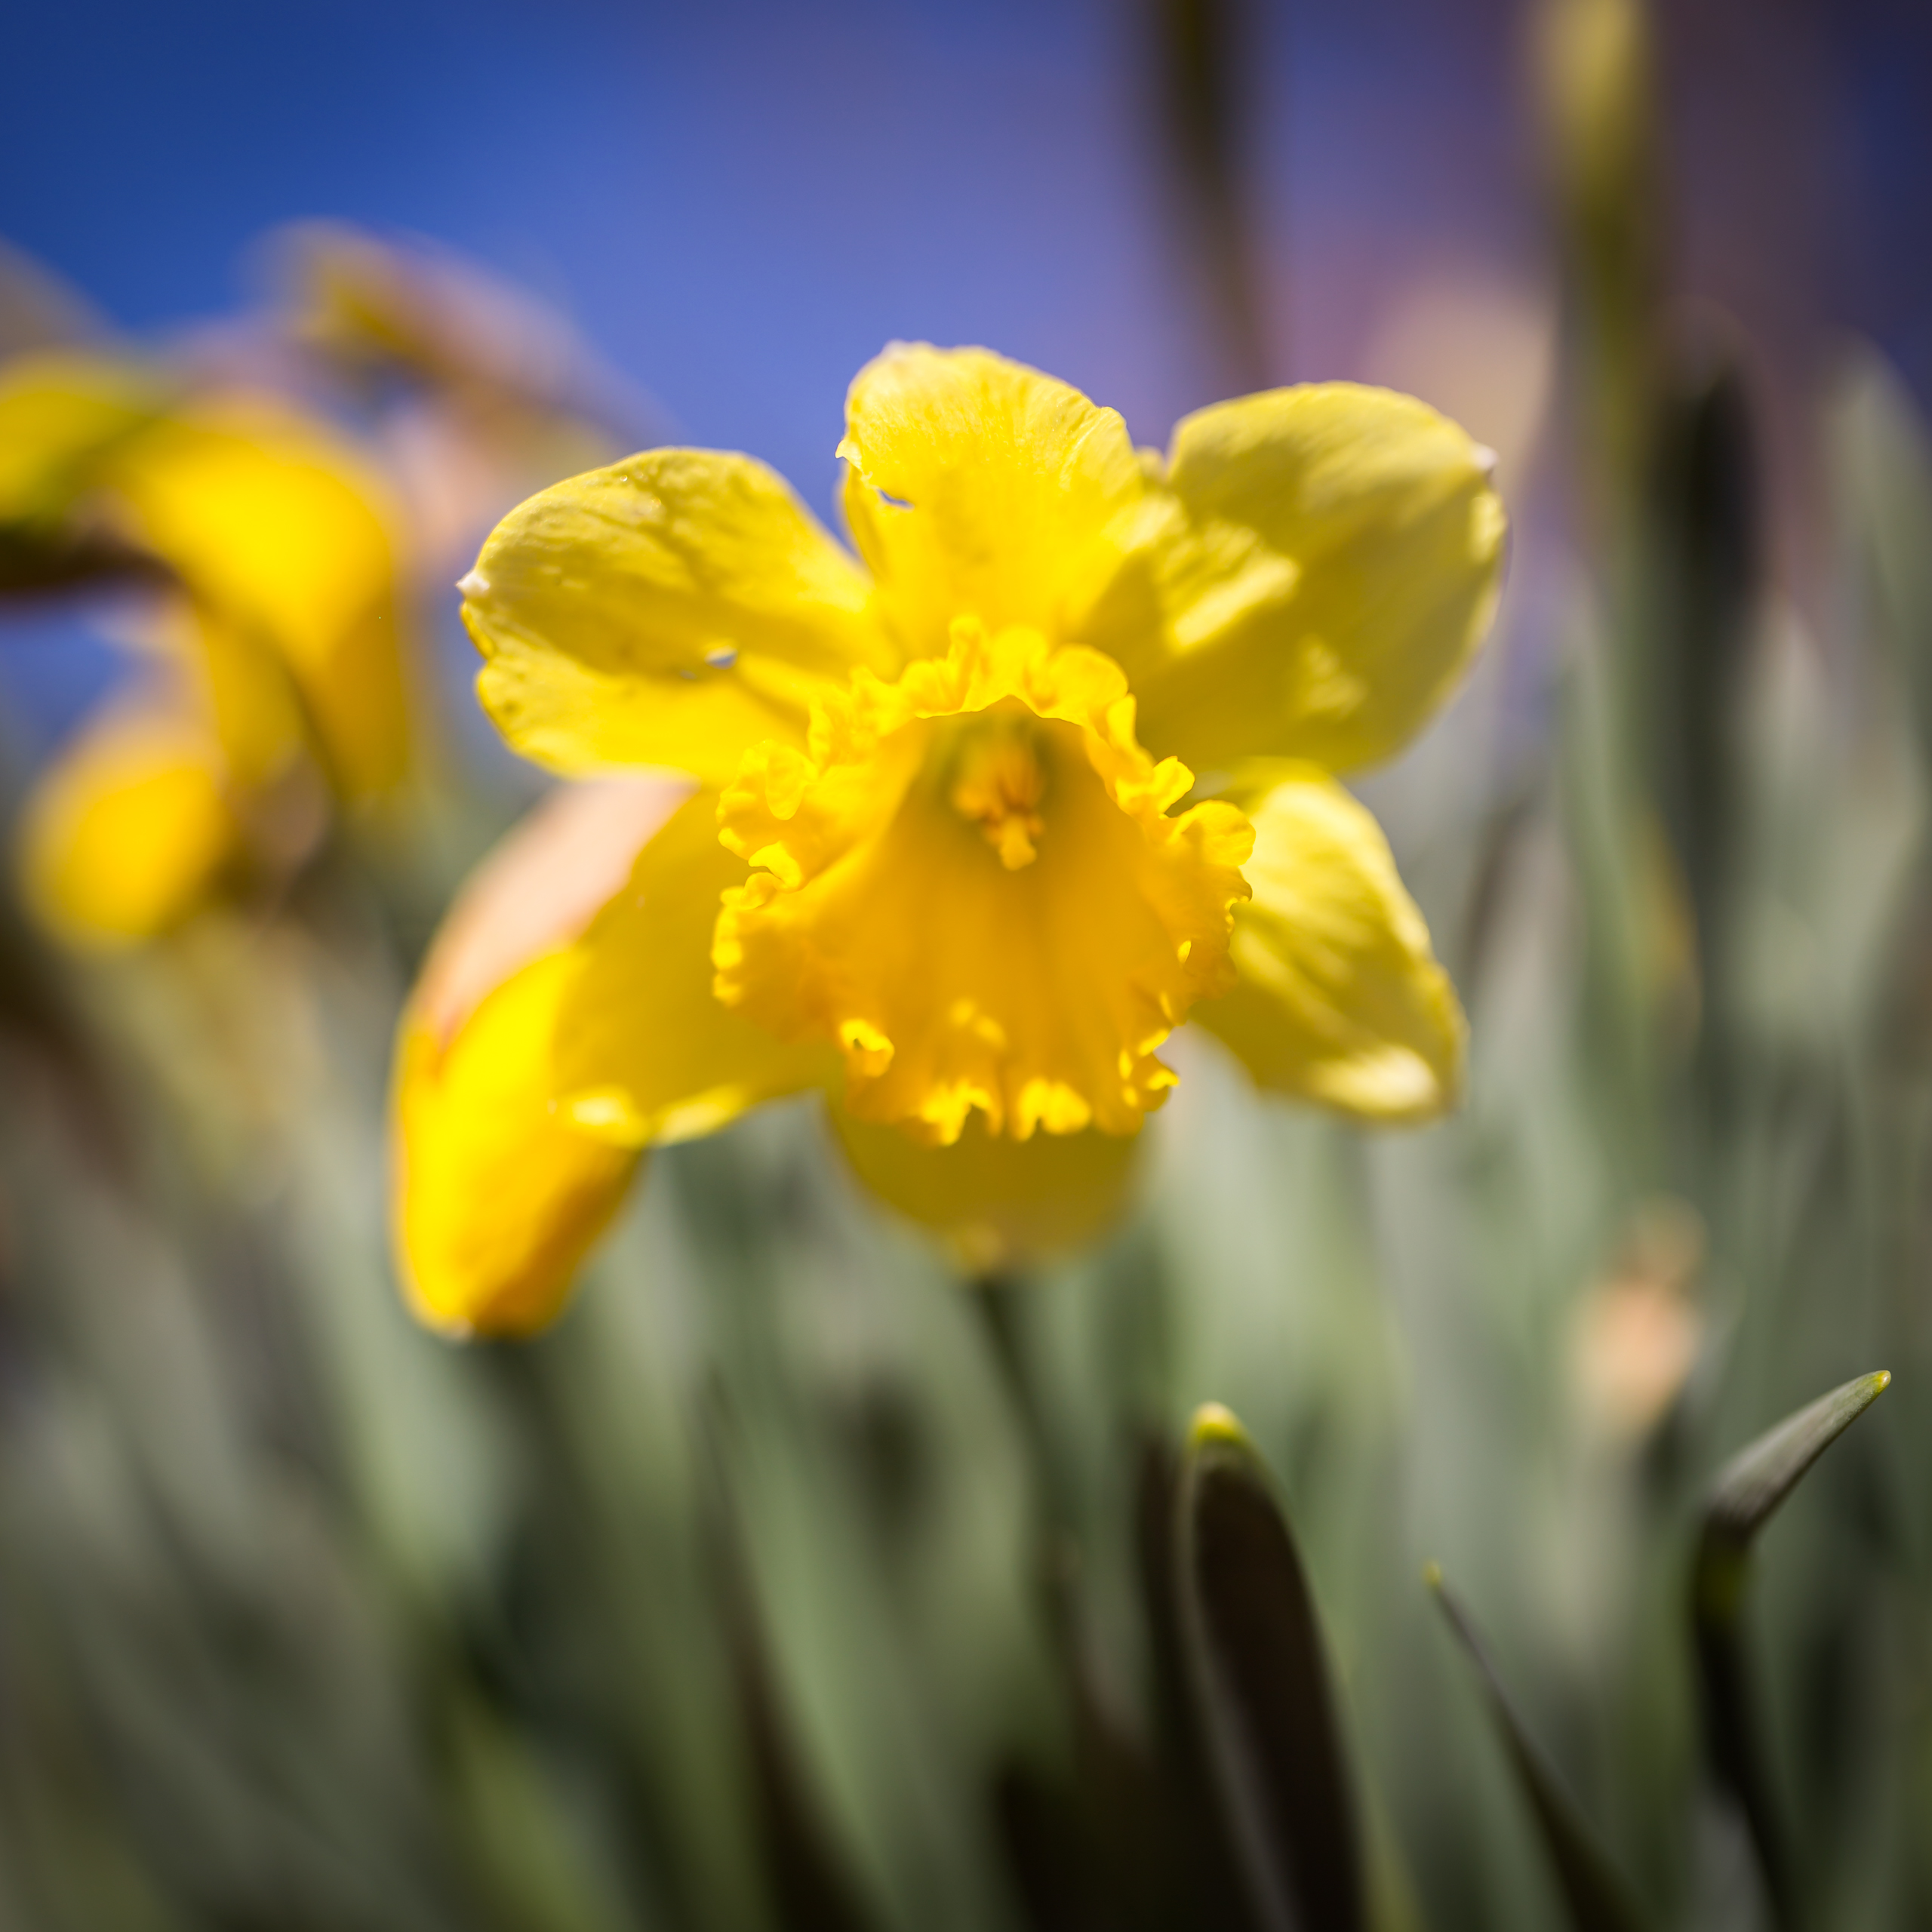 Photograph of a freshly bloomed daffodil